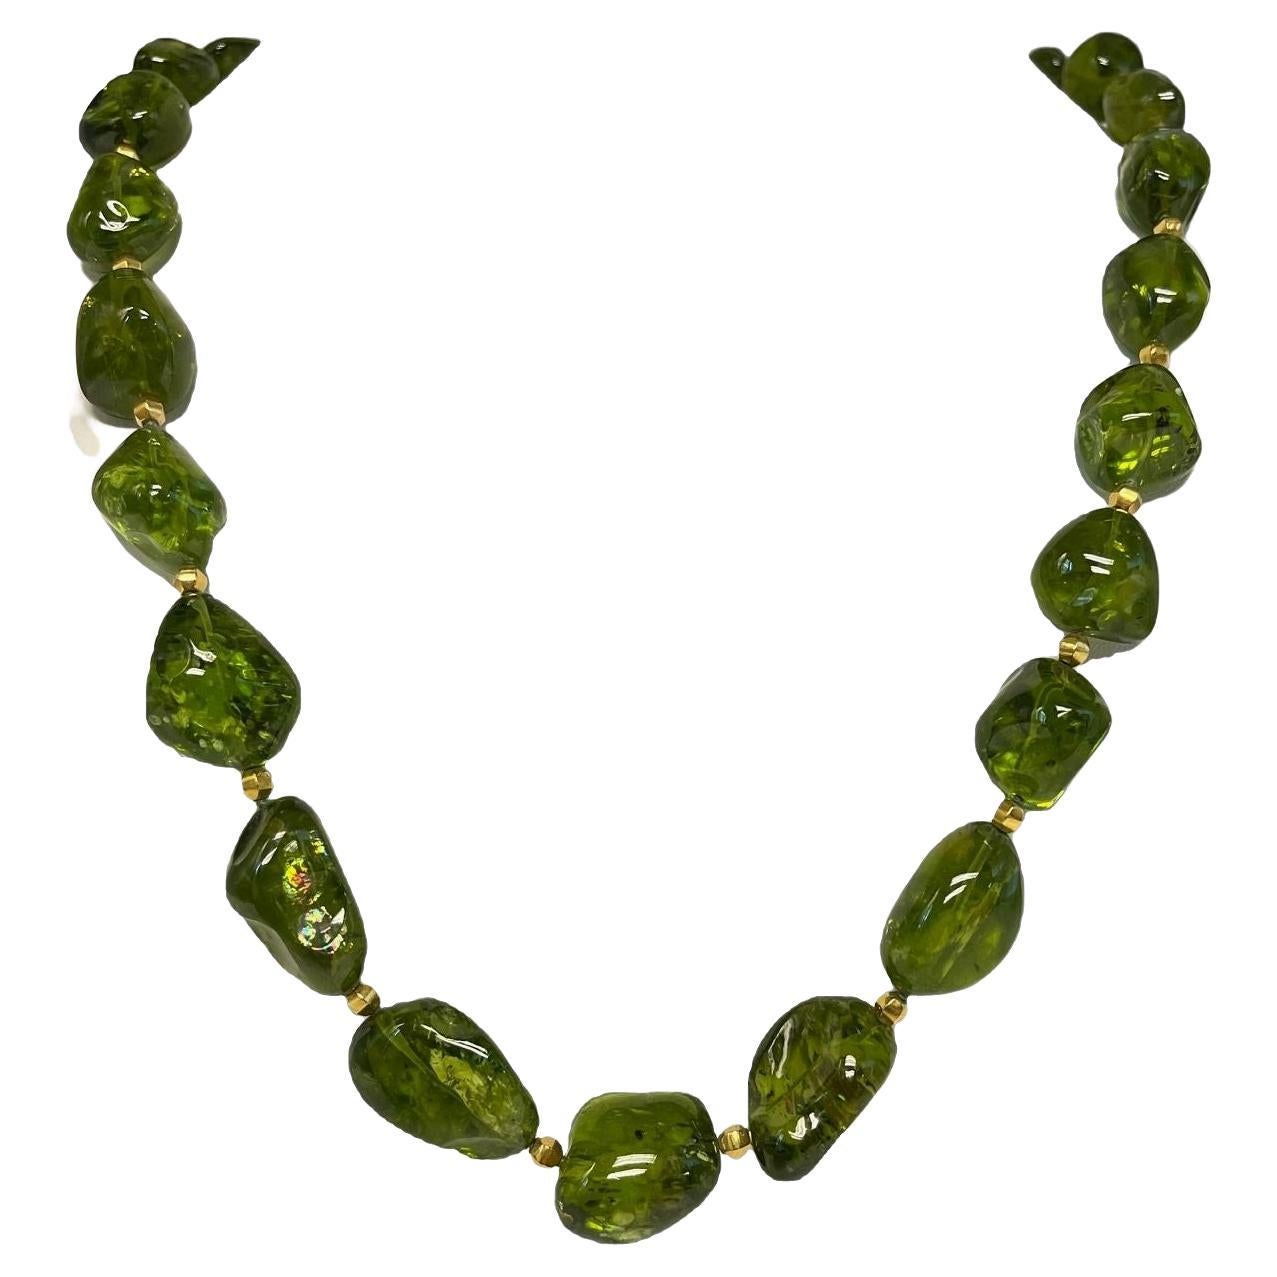 This gorgeous strand of large, peridot nugget beads is a beautiful statement necklace that can be worn during any season! Displaying a beautiful shade of bright, chartreuse color, this stunning collection of fine peridot beads graduate in size from 